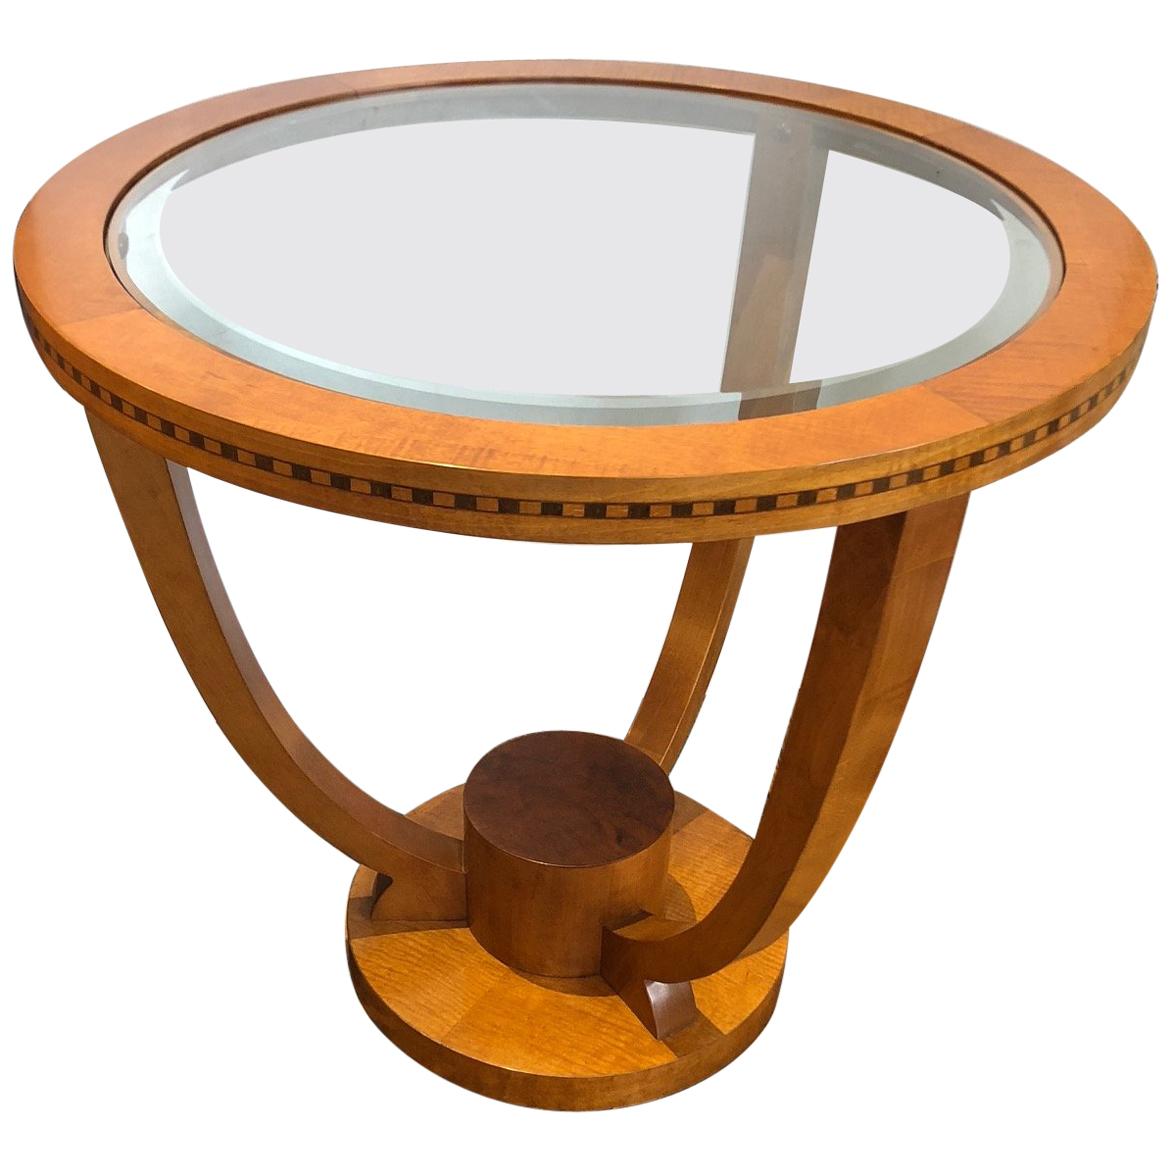 Classy Art Deco Style Round Side or End Table